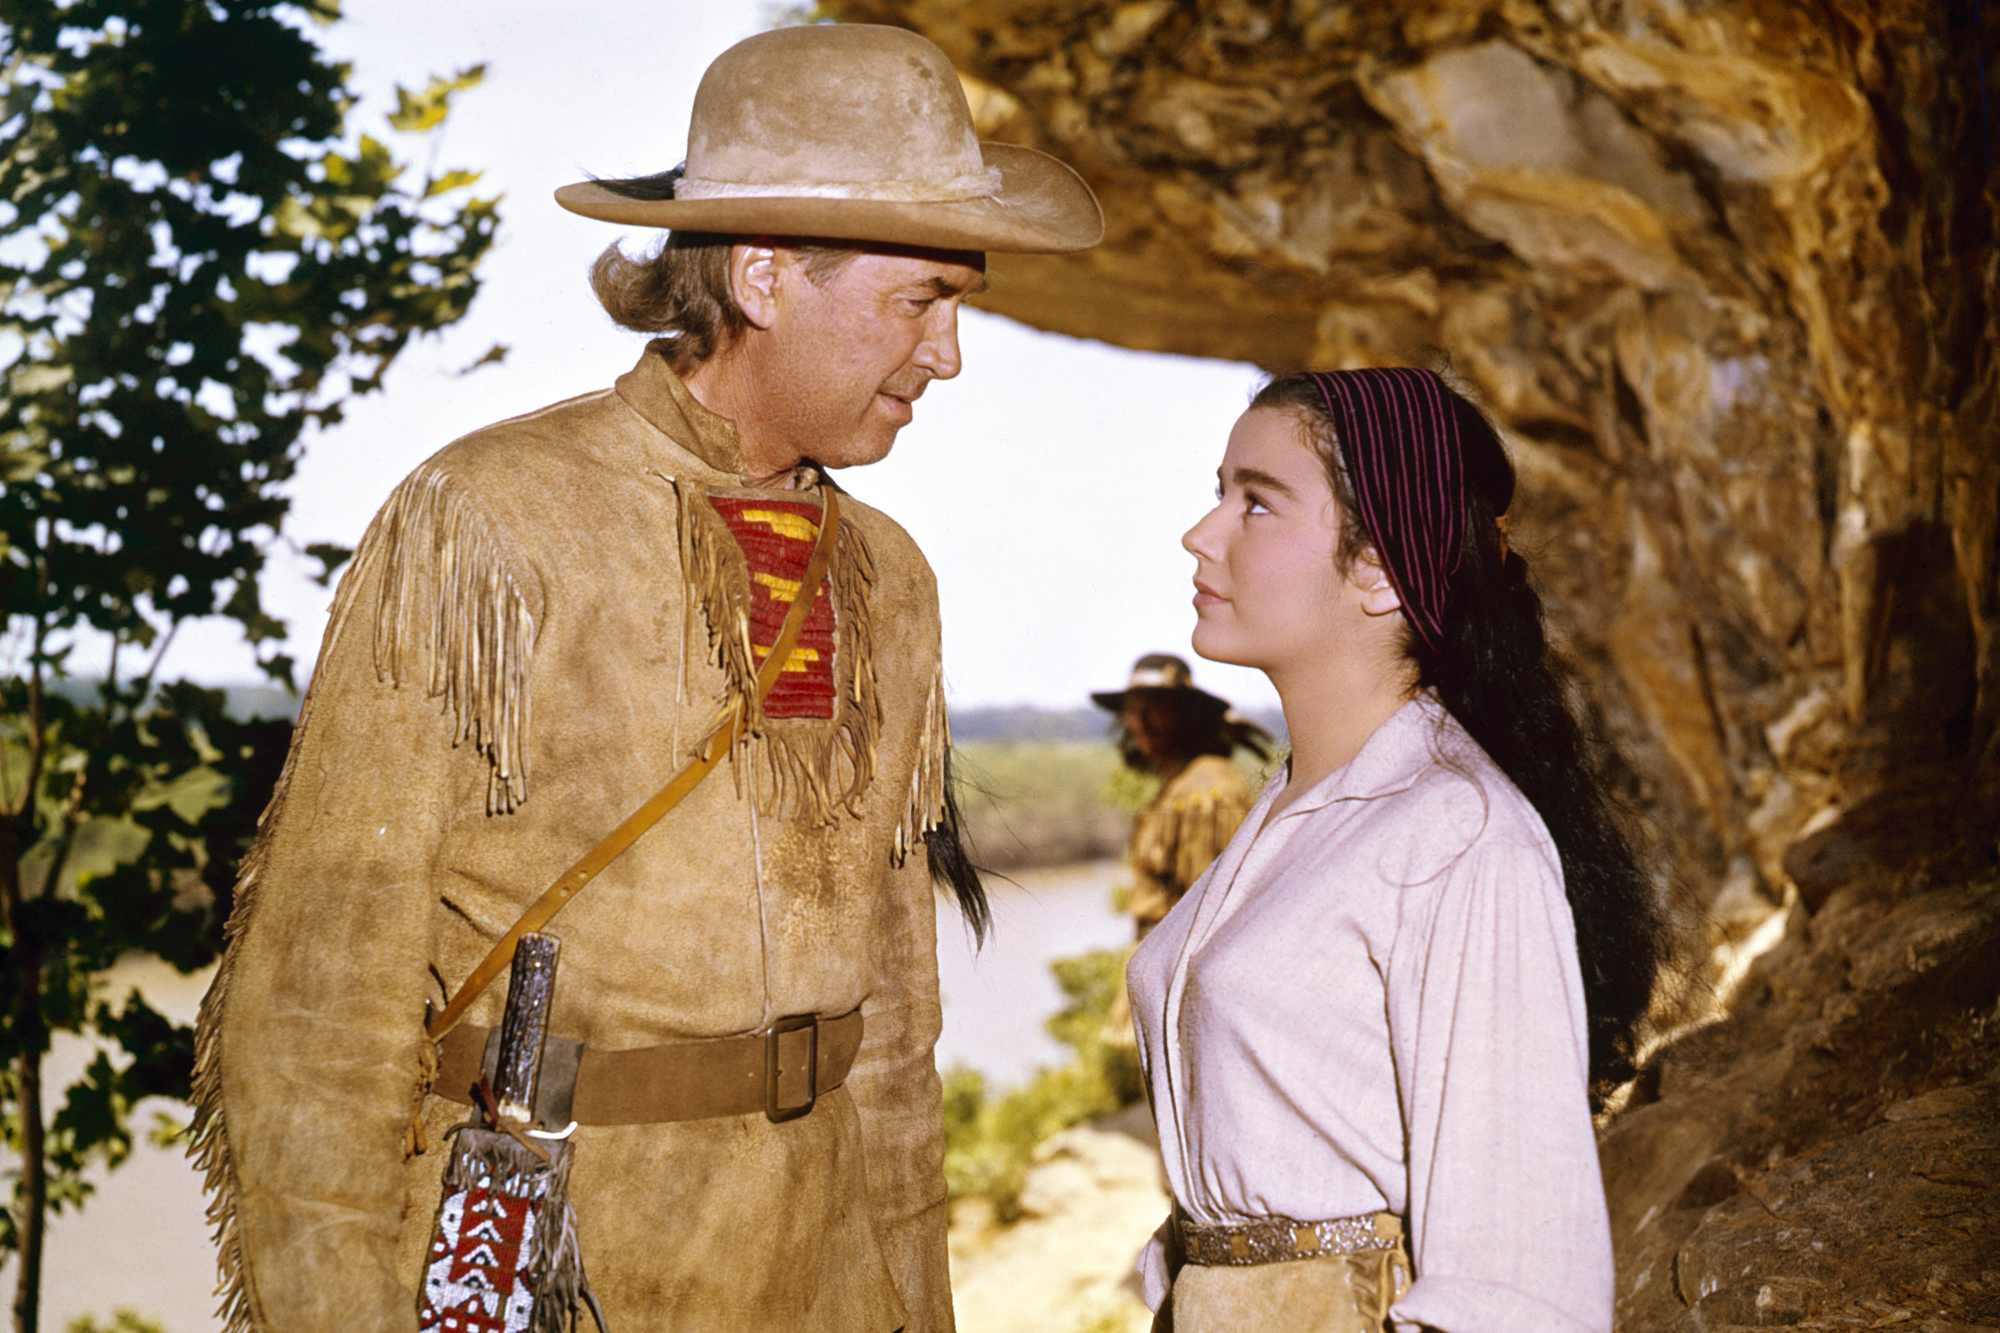 'How the West Was Won' James Stewart as Linus Rawlings and Brigid Bazlen as Dora Hawkins wearing Western costumes looking at one another over a rock overhang